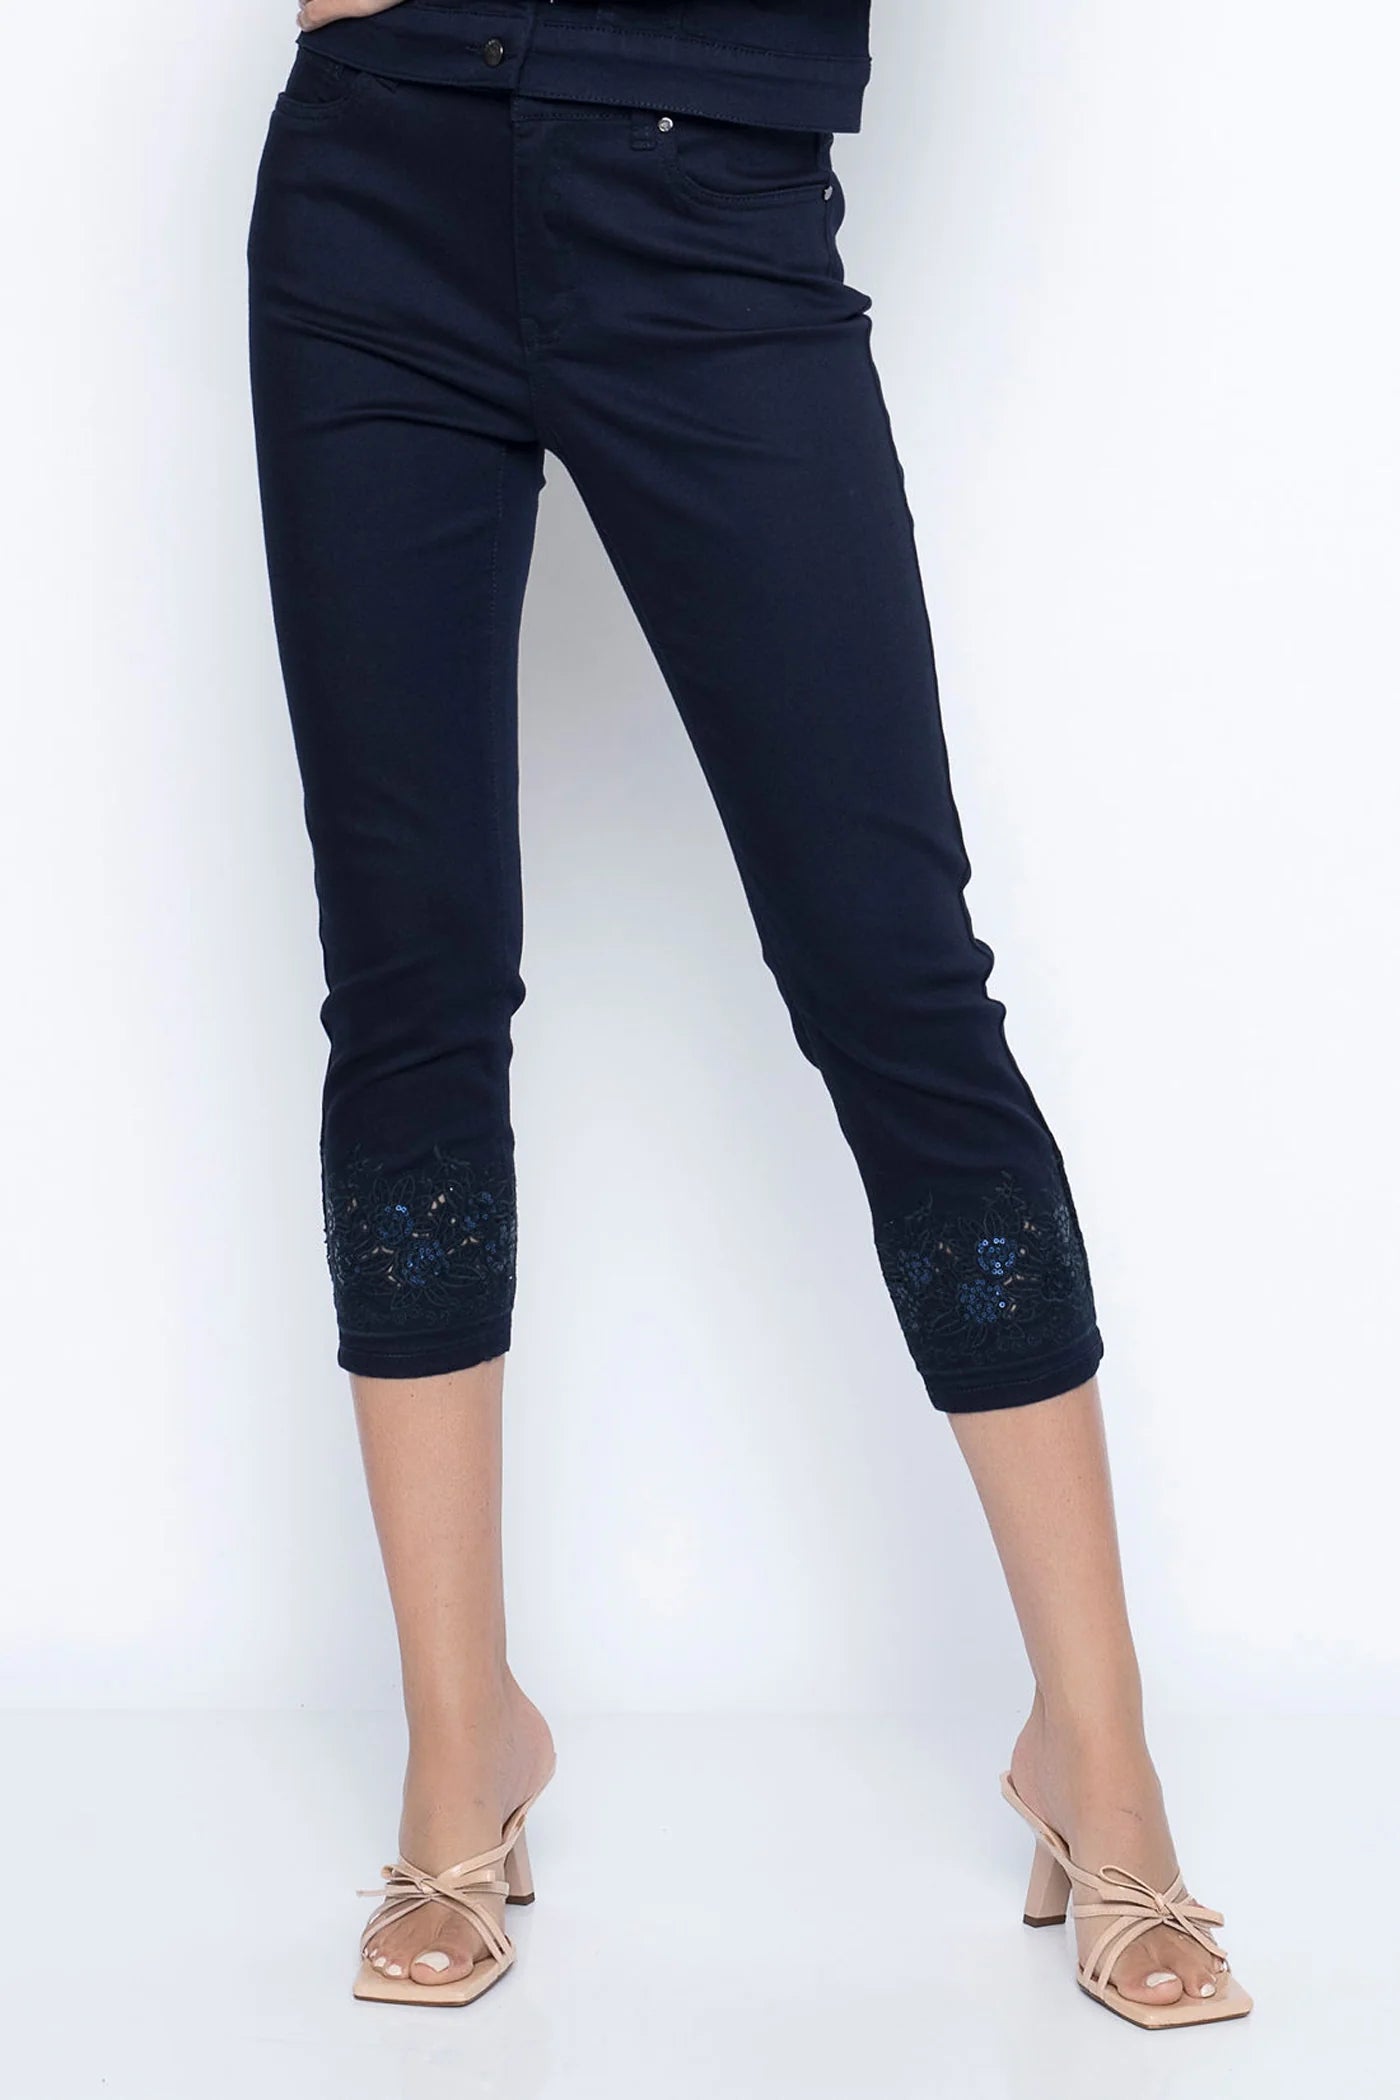 Picadilly Cut Out Navy Jeans